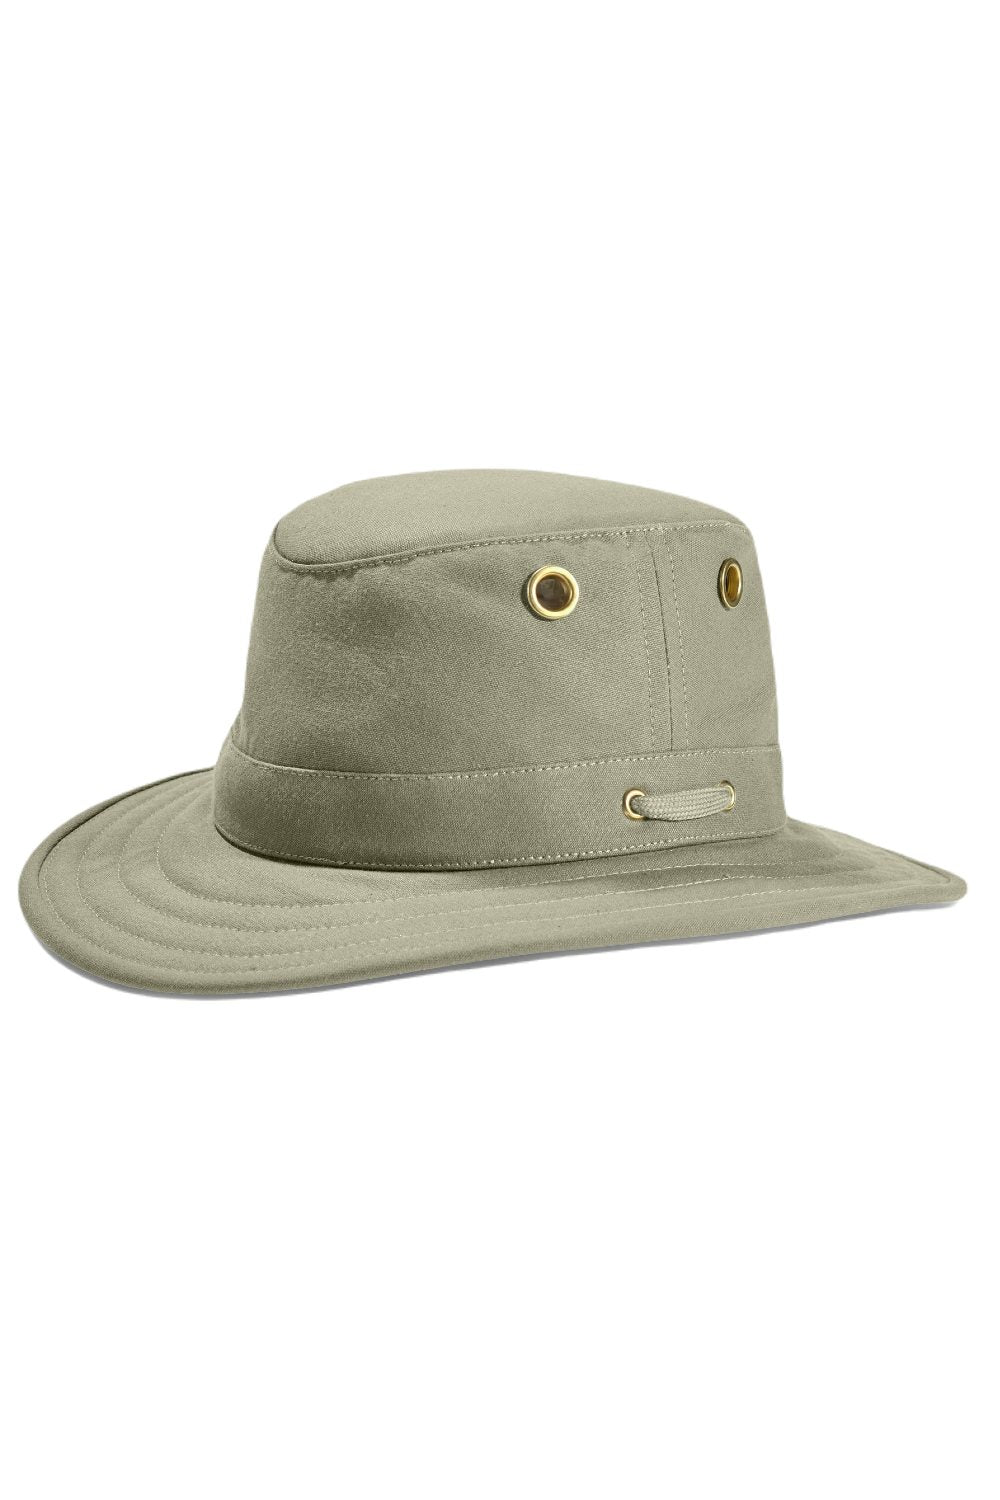 Tilley Hats Authentic Hat In Khaki/Olive 